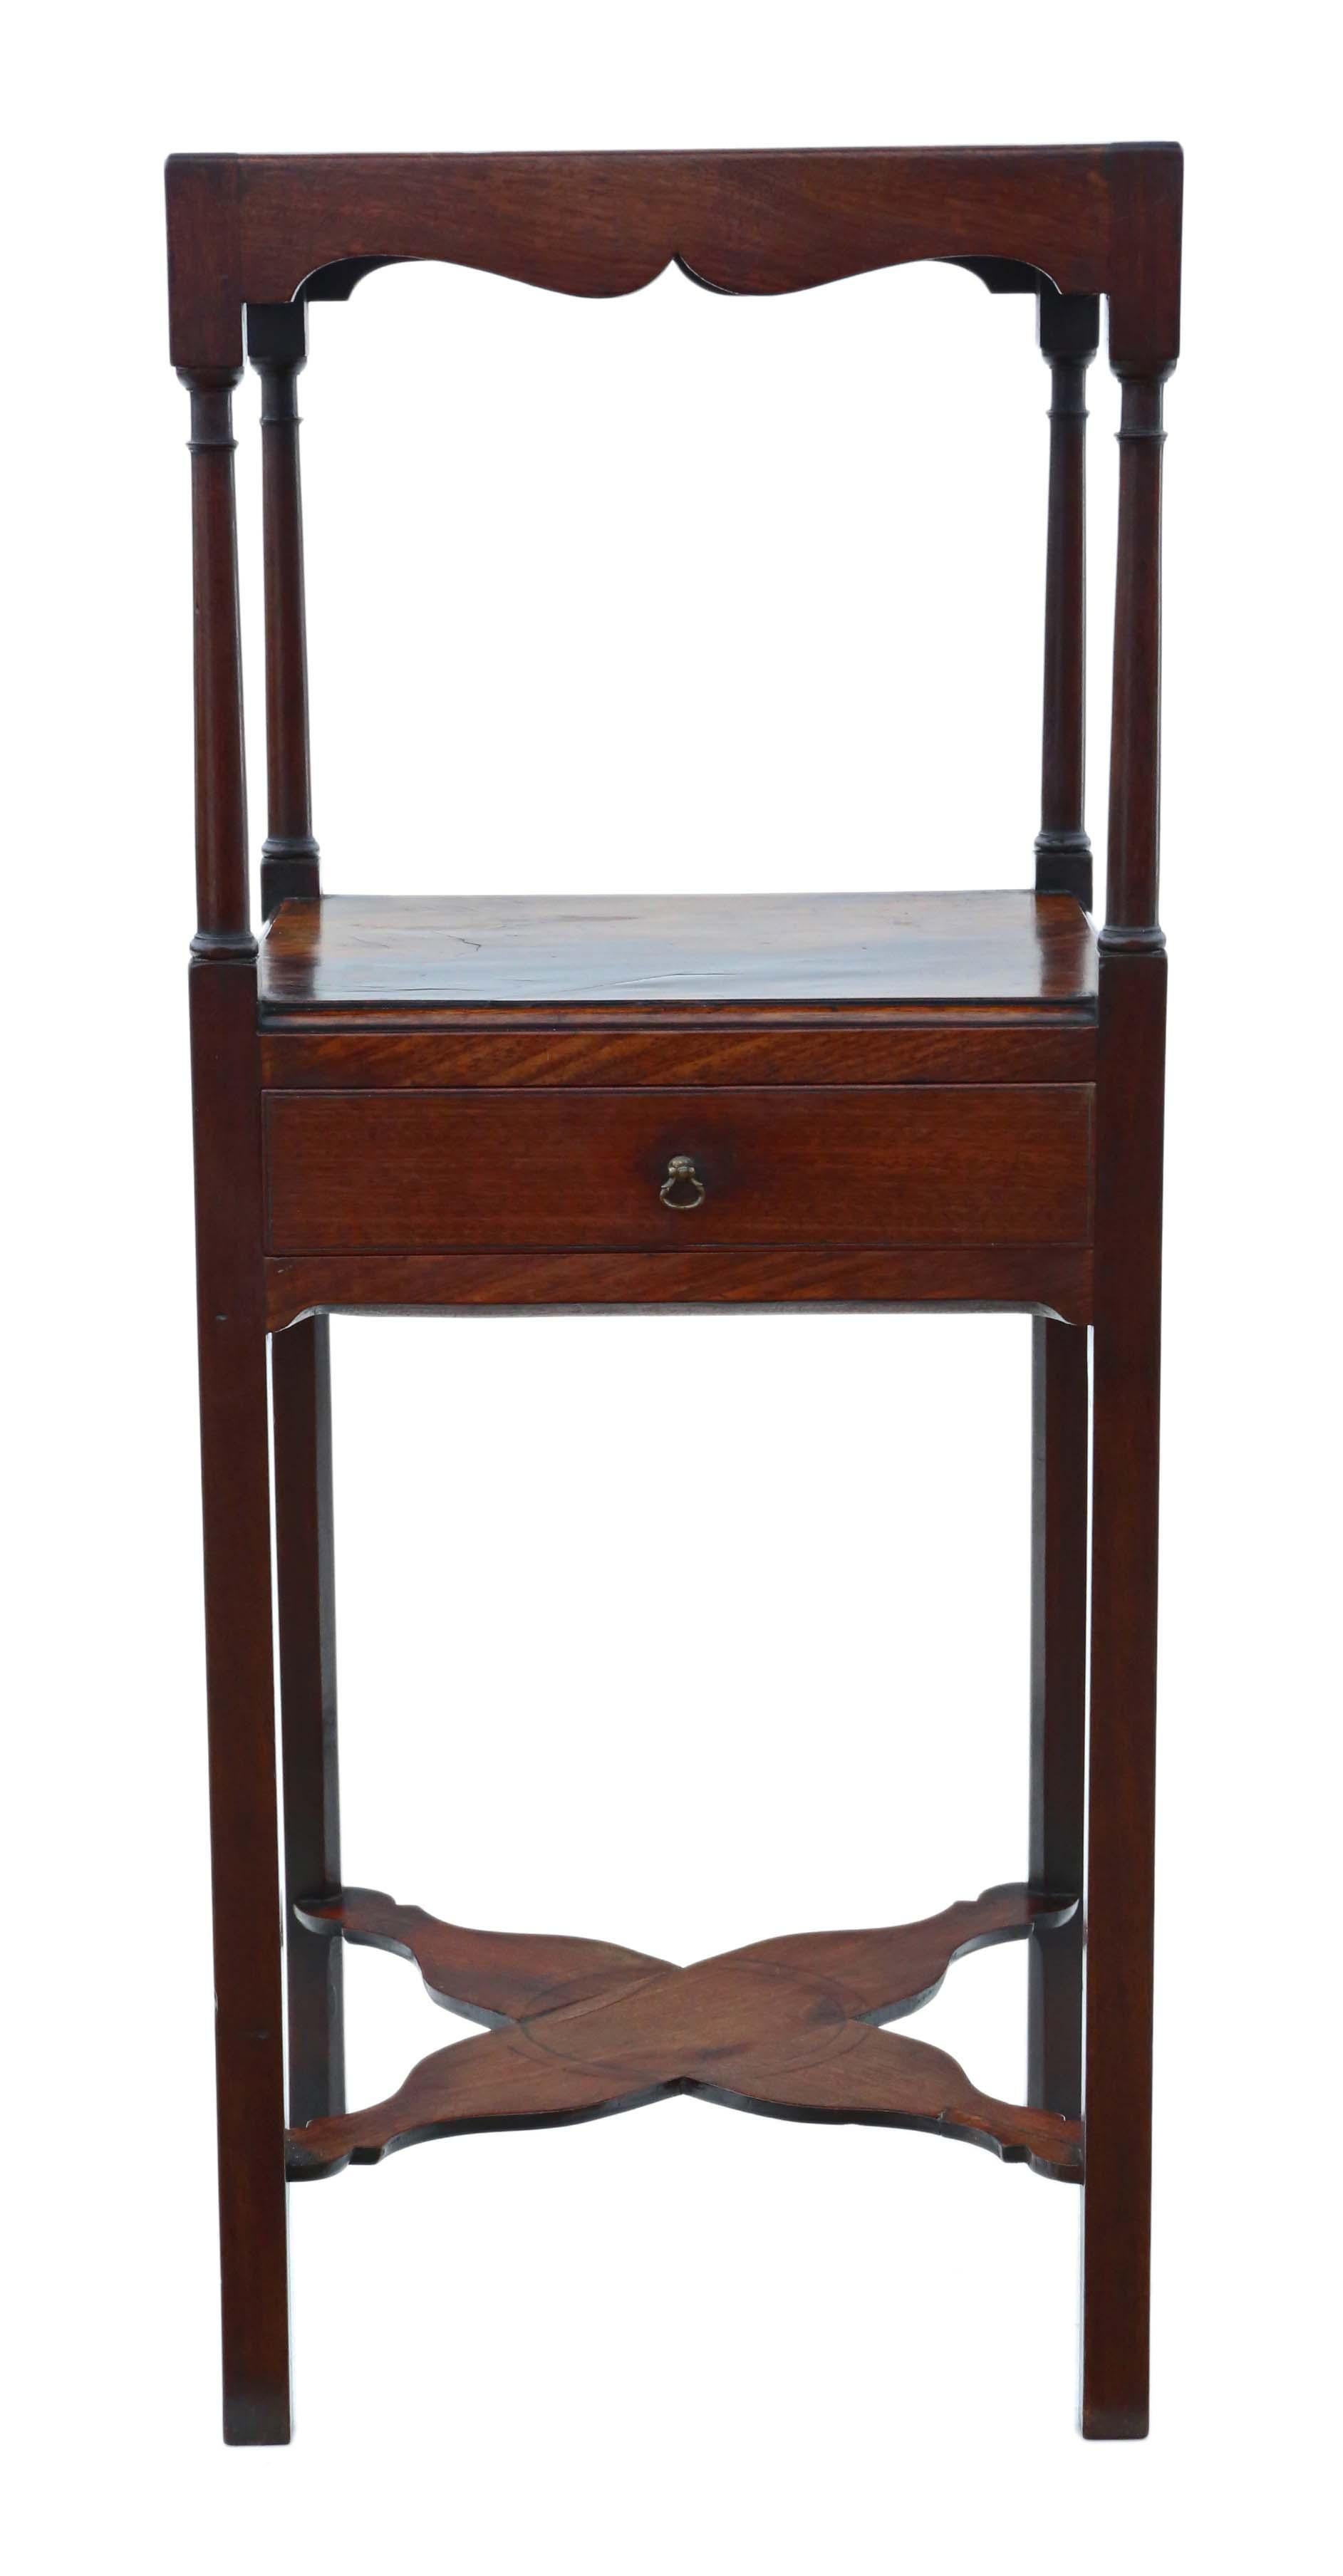 Antique quality Georgian mahogany washstand, nightstand or bedside table C1815.

Great rare item, which is solid with no loose joints and no woodworm. The drawer slides freely.

Lovely age, colour and patina.

35cm wide x 35cm deep x 83cm